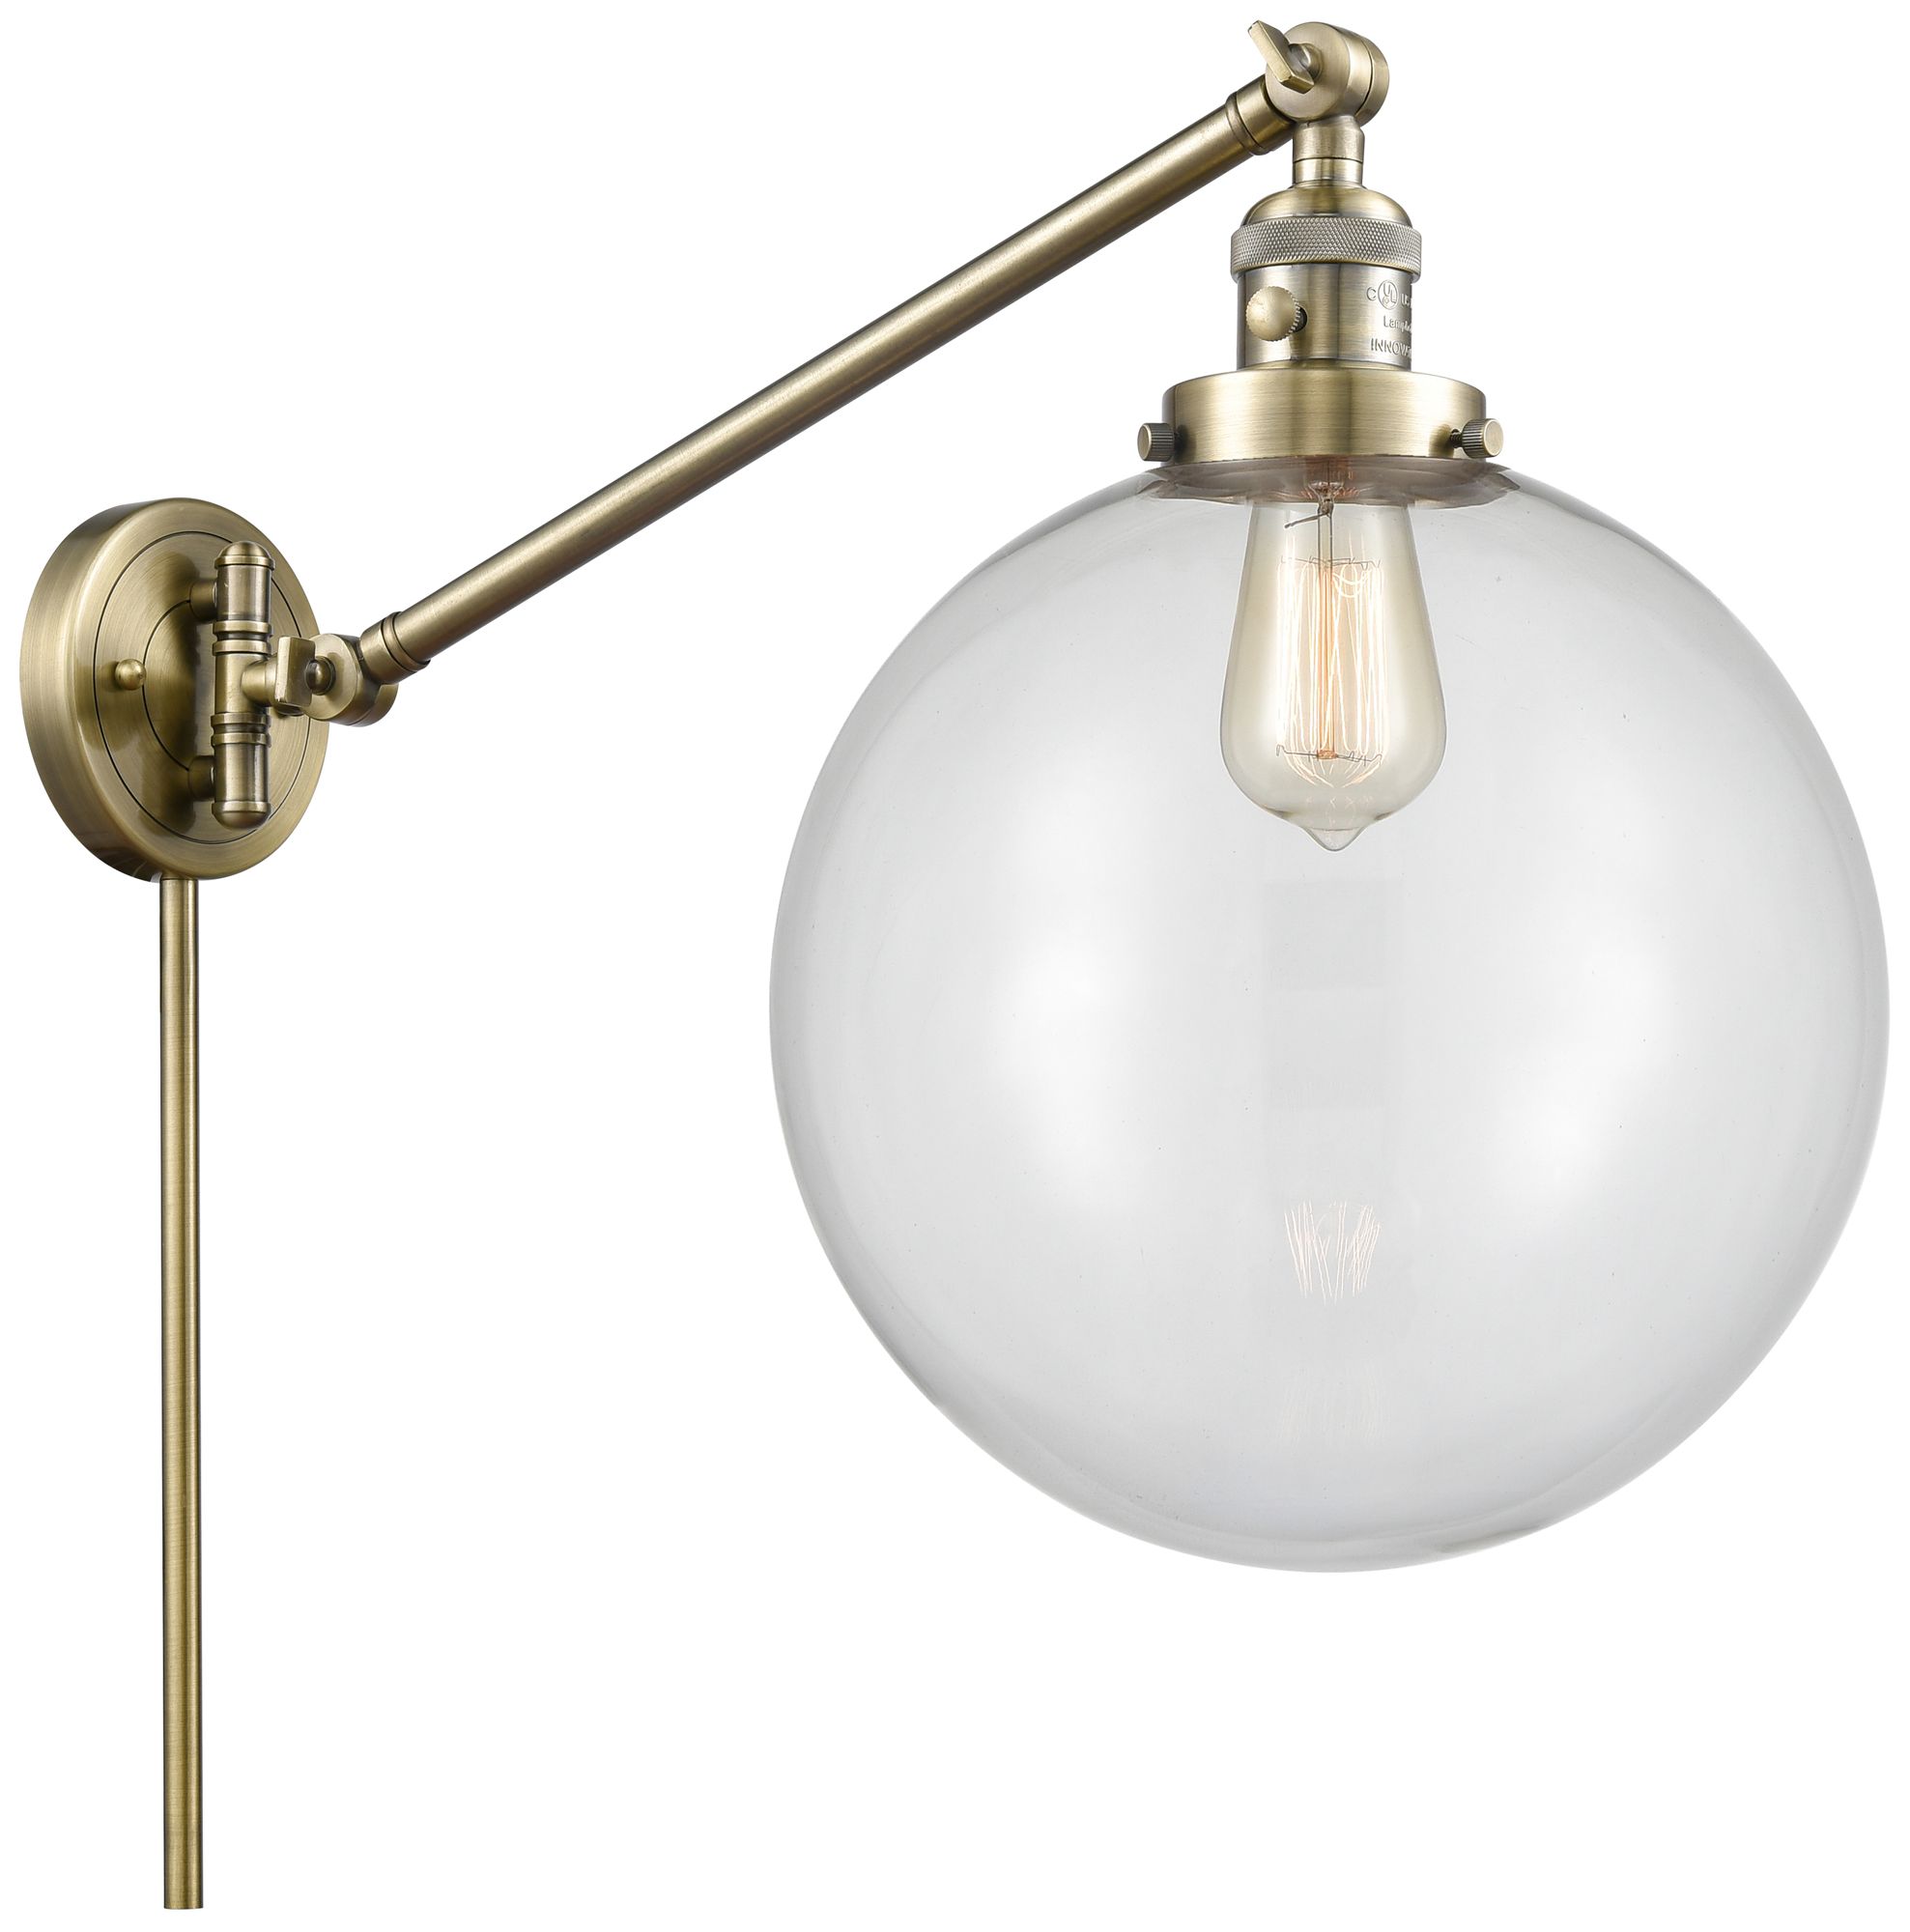 Beacon 12" Antique Brass LED Swing Arm With Clear Shade